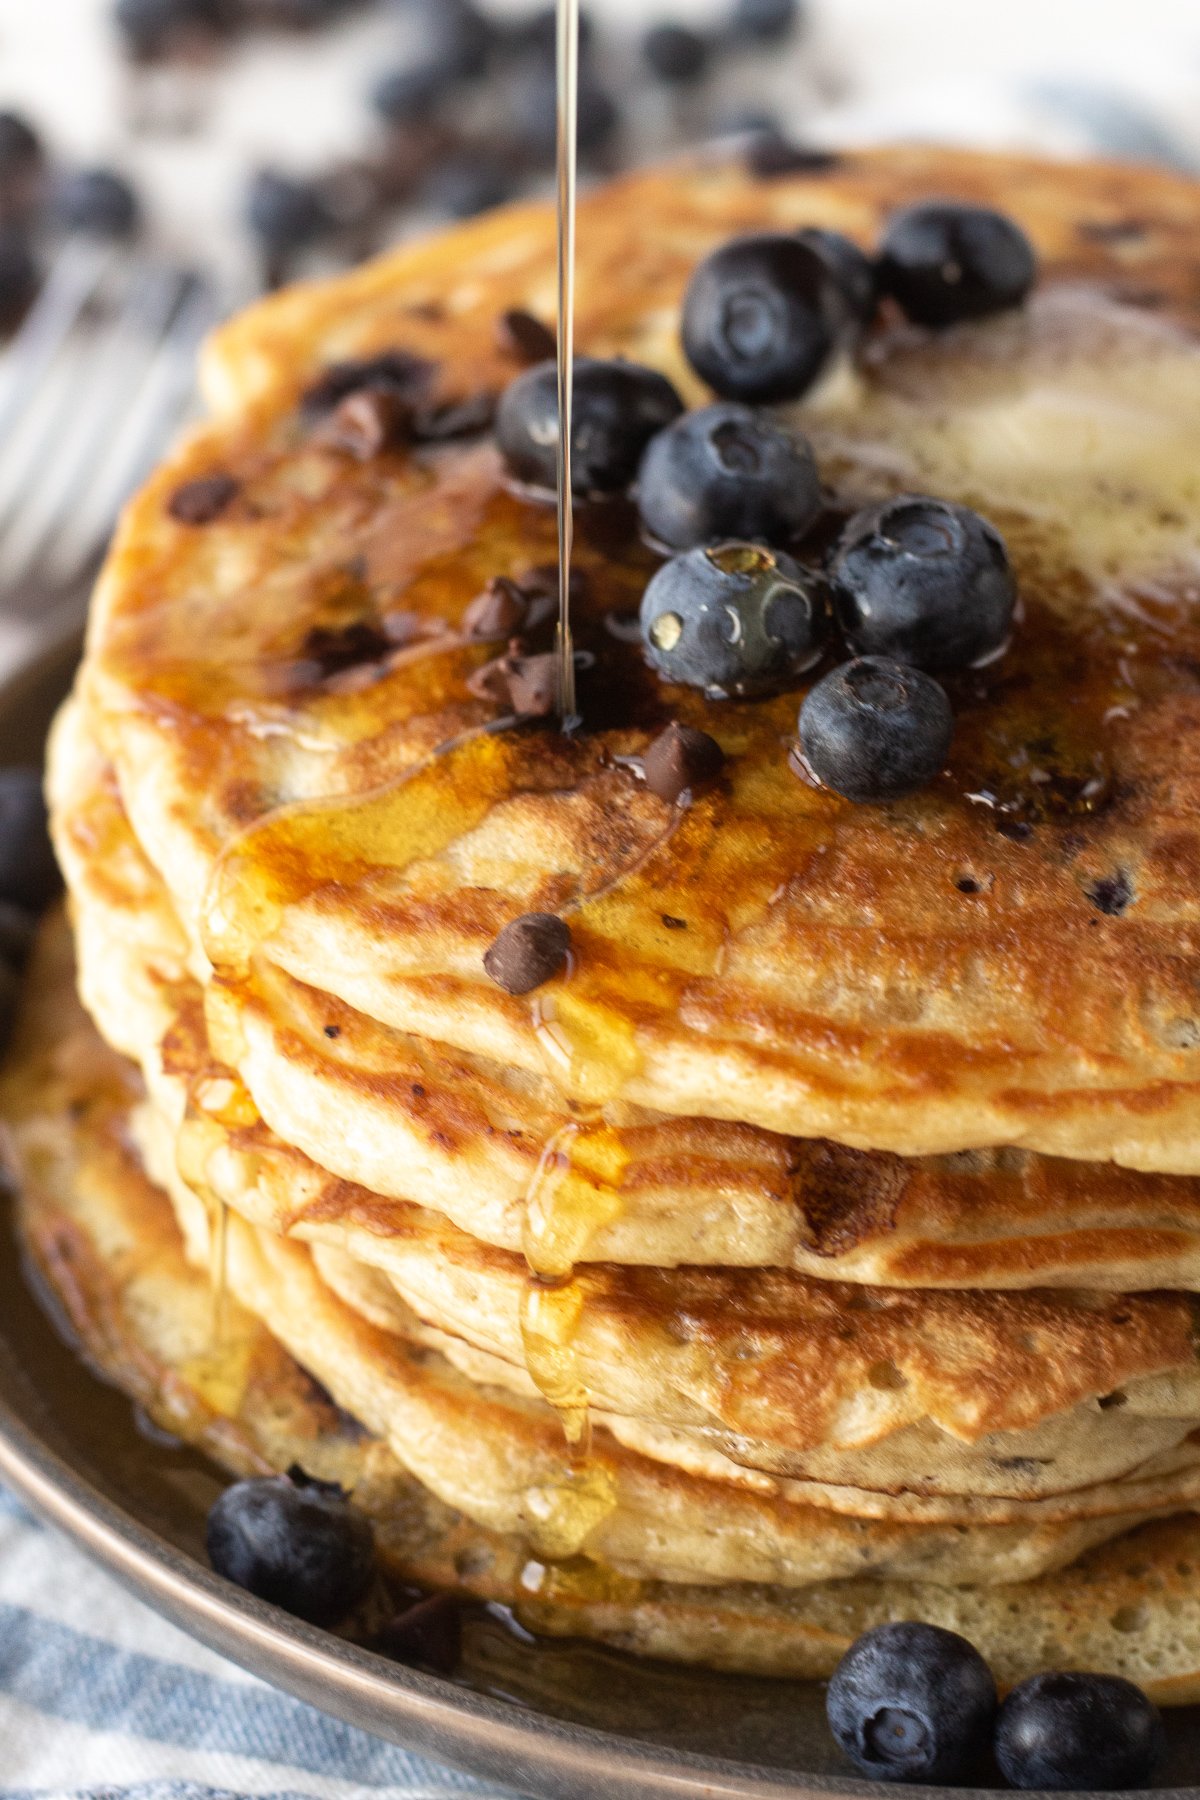 Fat stack of pancakes with fresh blueberries on top and being drizzled with syrup.